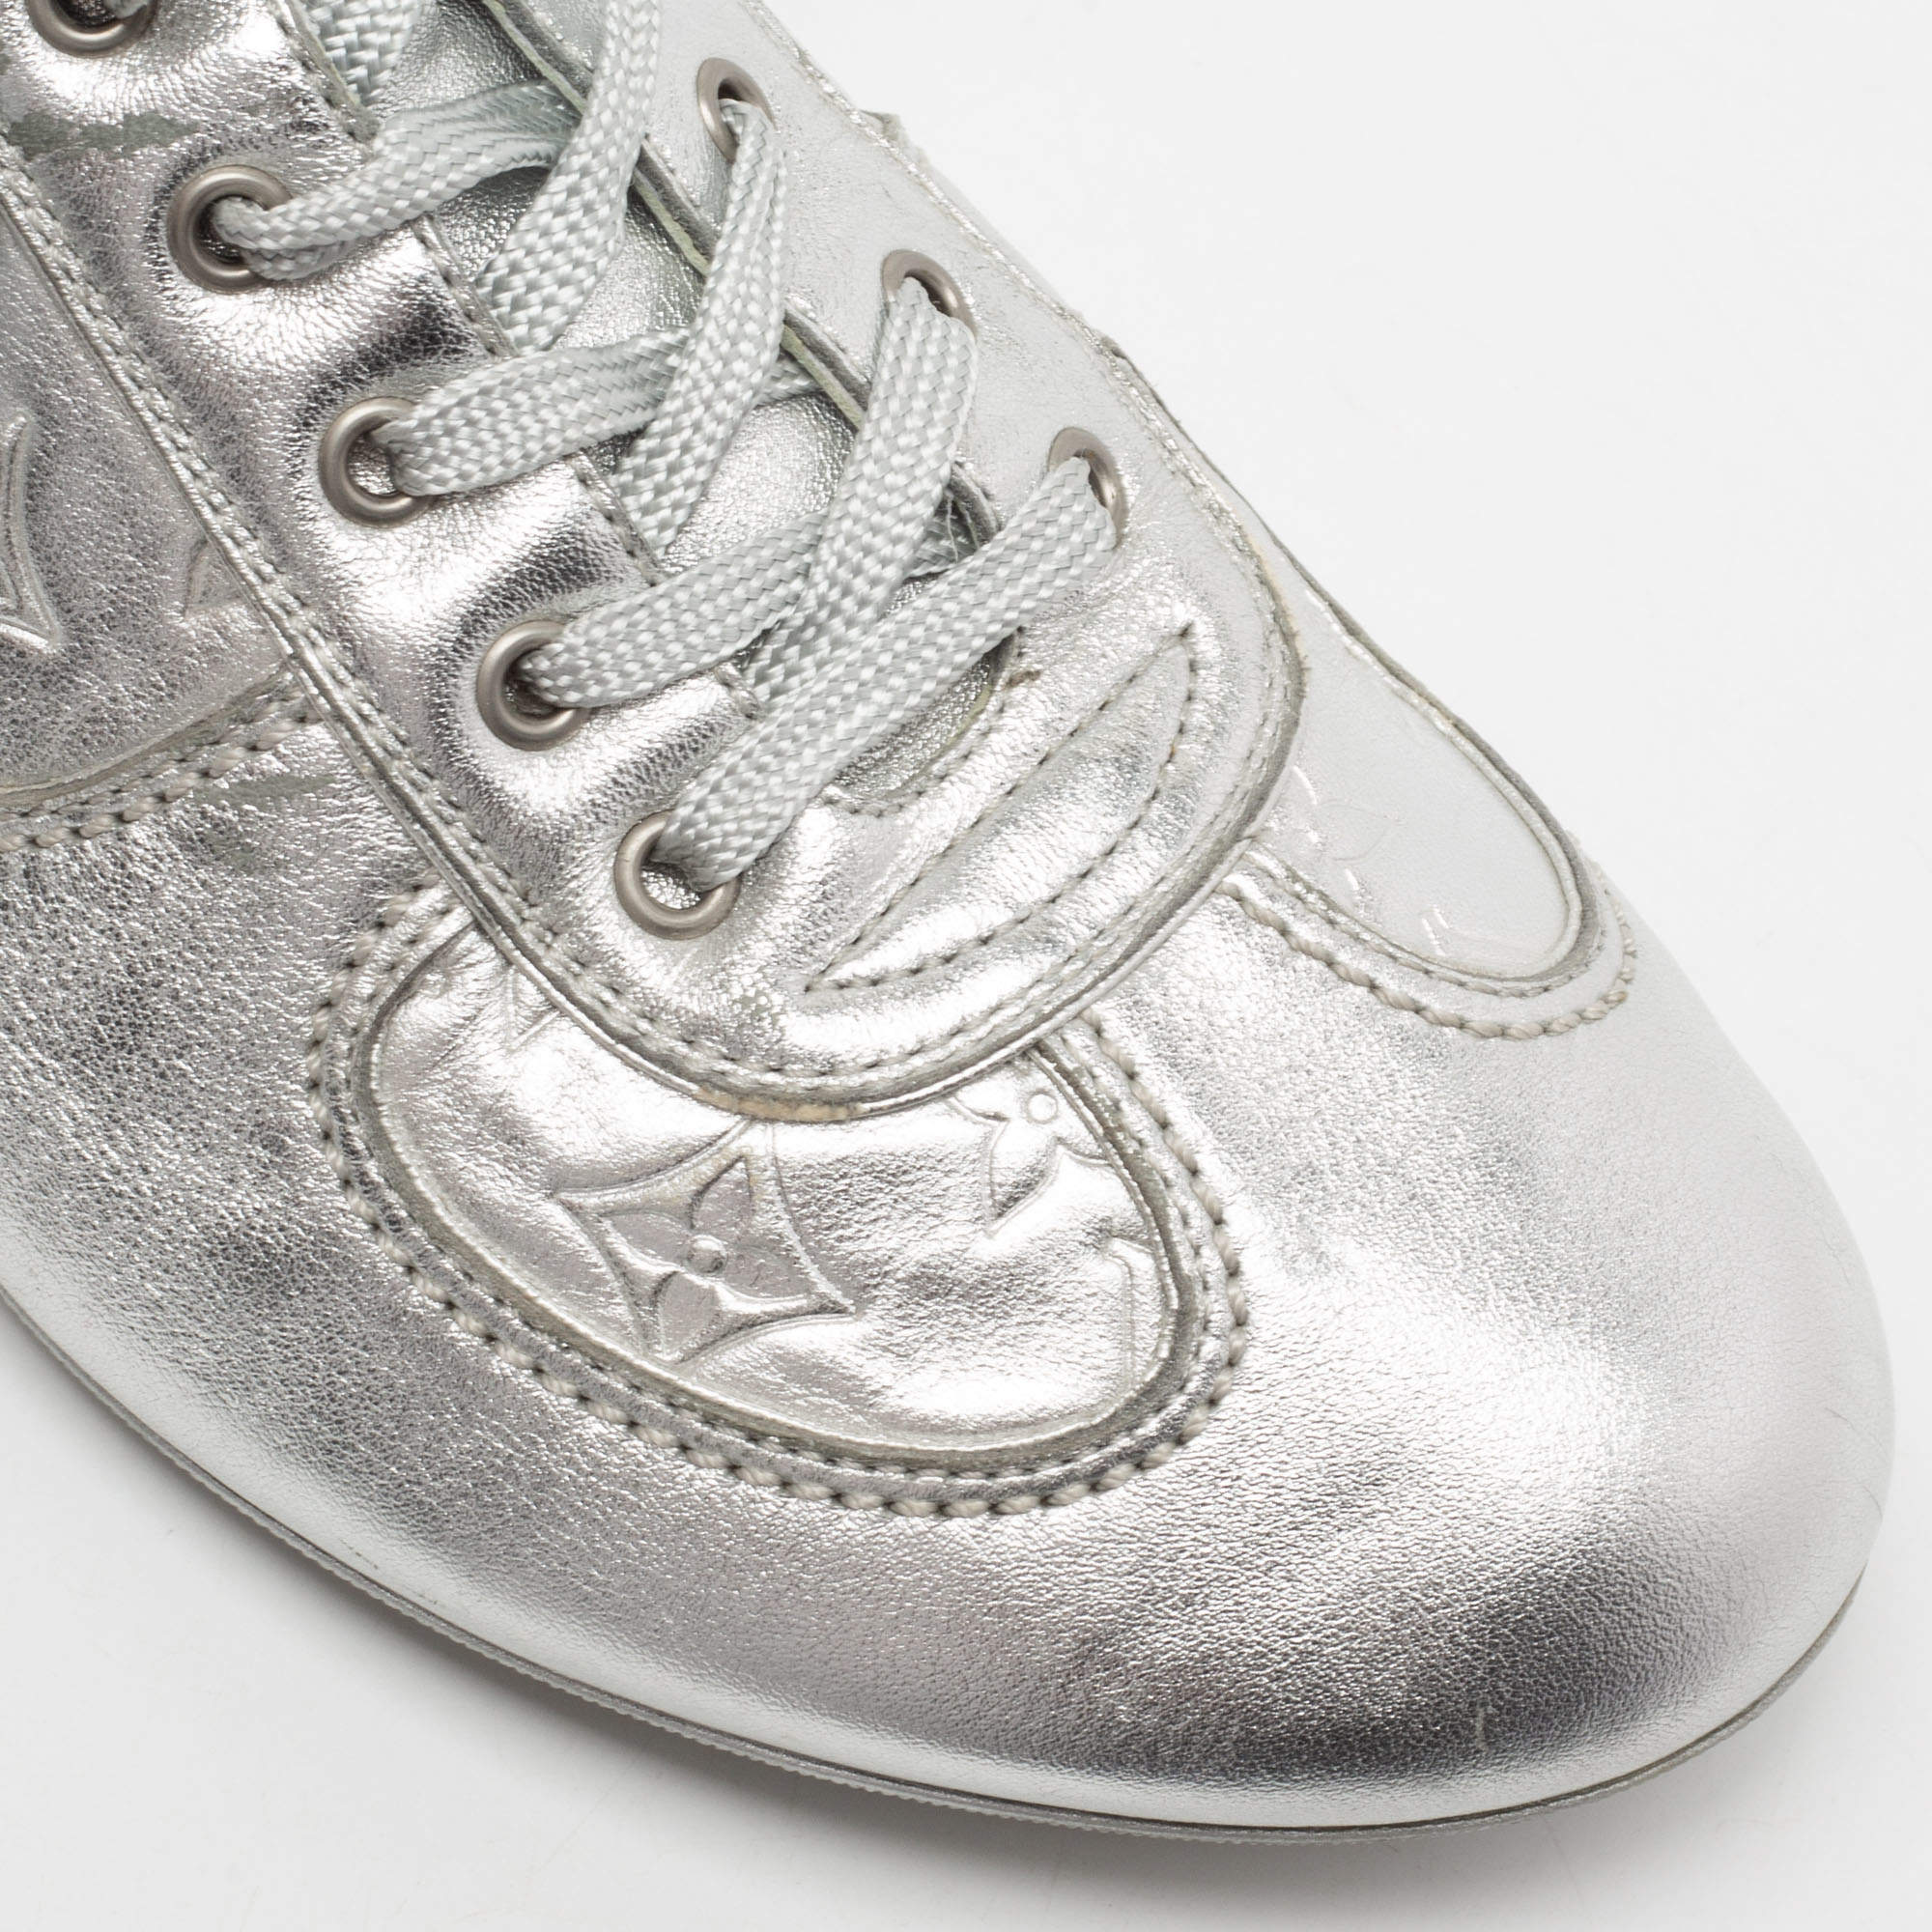 Louis Vuitton Metallic Silver Monogram Leather Trainers Lace Up Low Top  Sneakers Size 38 Louis Vuitton